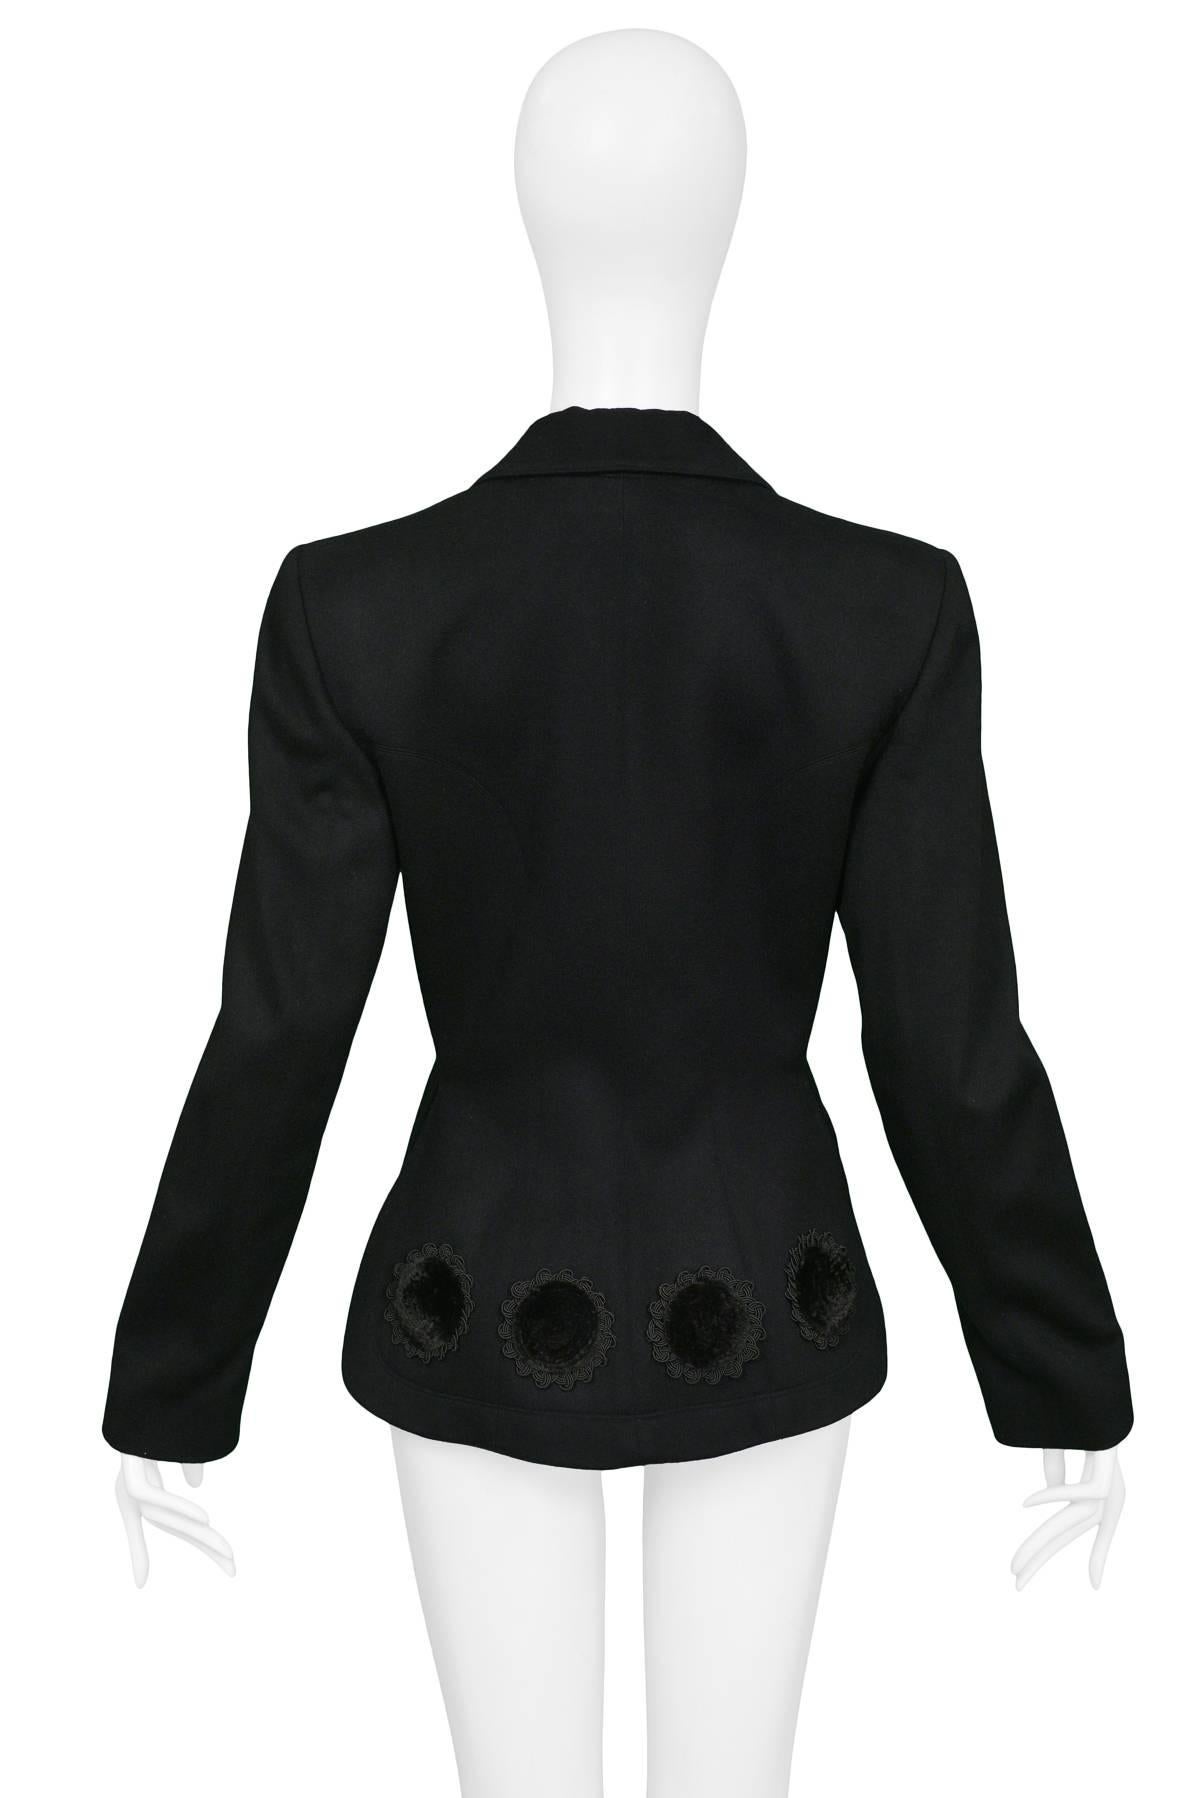 Vintage Alaia Black Fitted Wool Blazer with Velvet Applique NWOT 1991 In New Condition For Sale In Los Angeles, CA